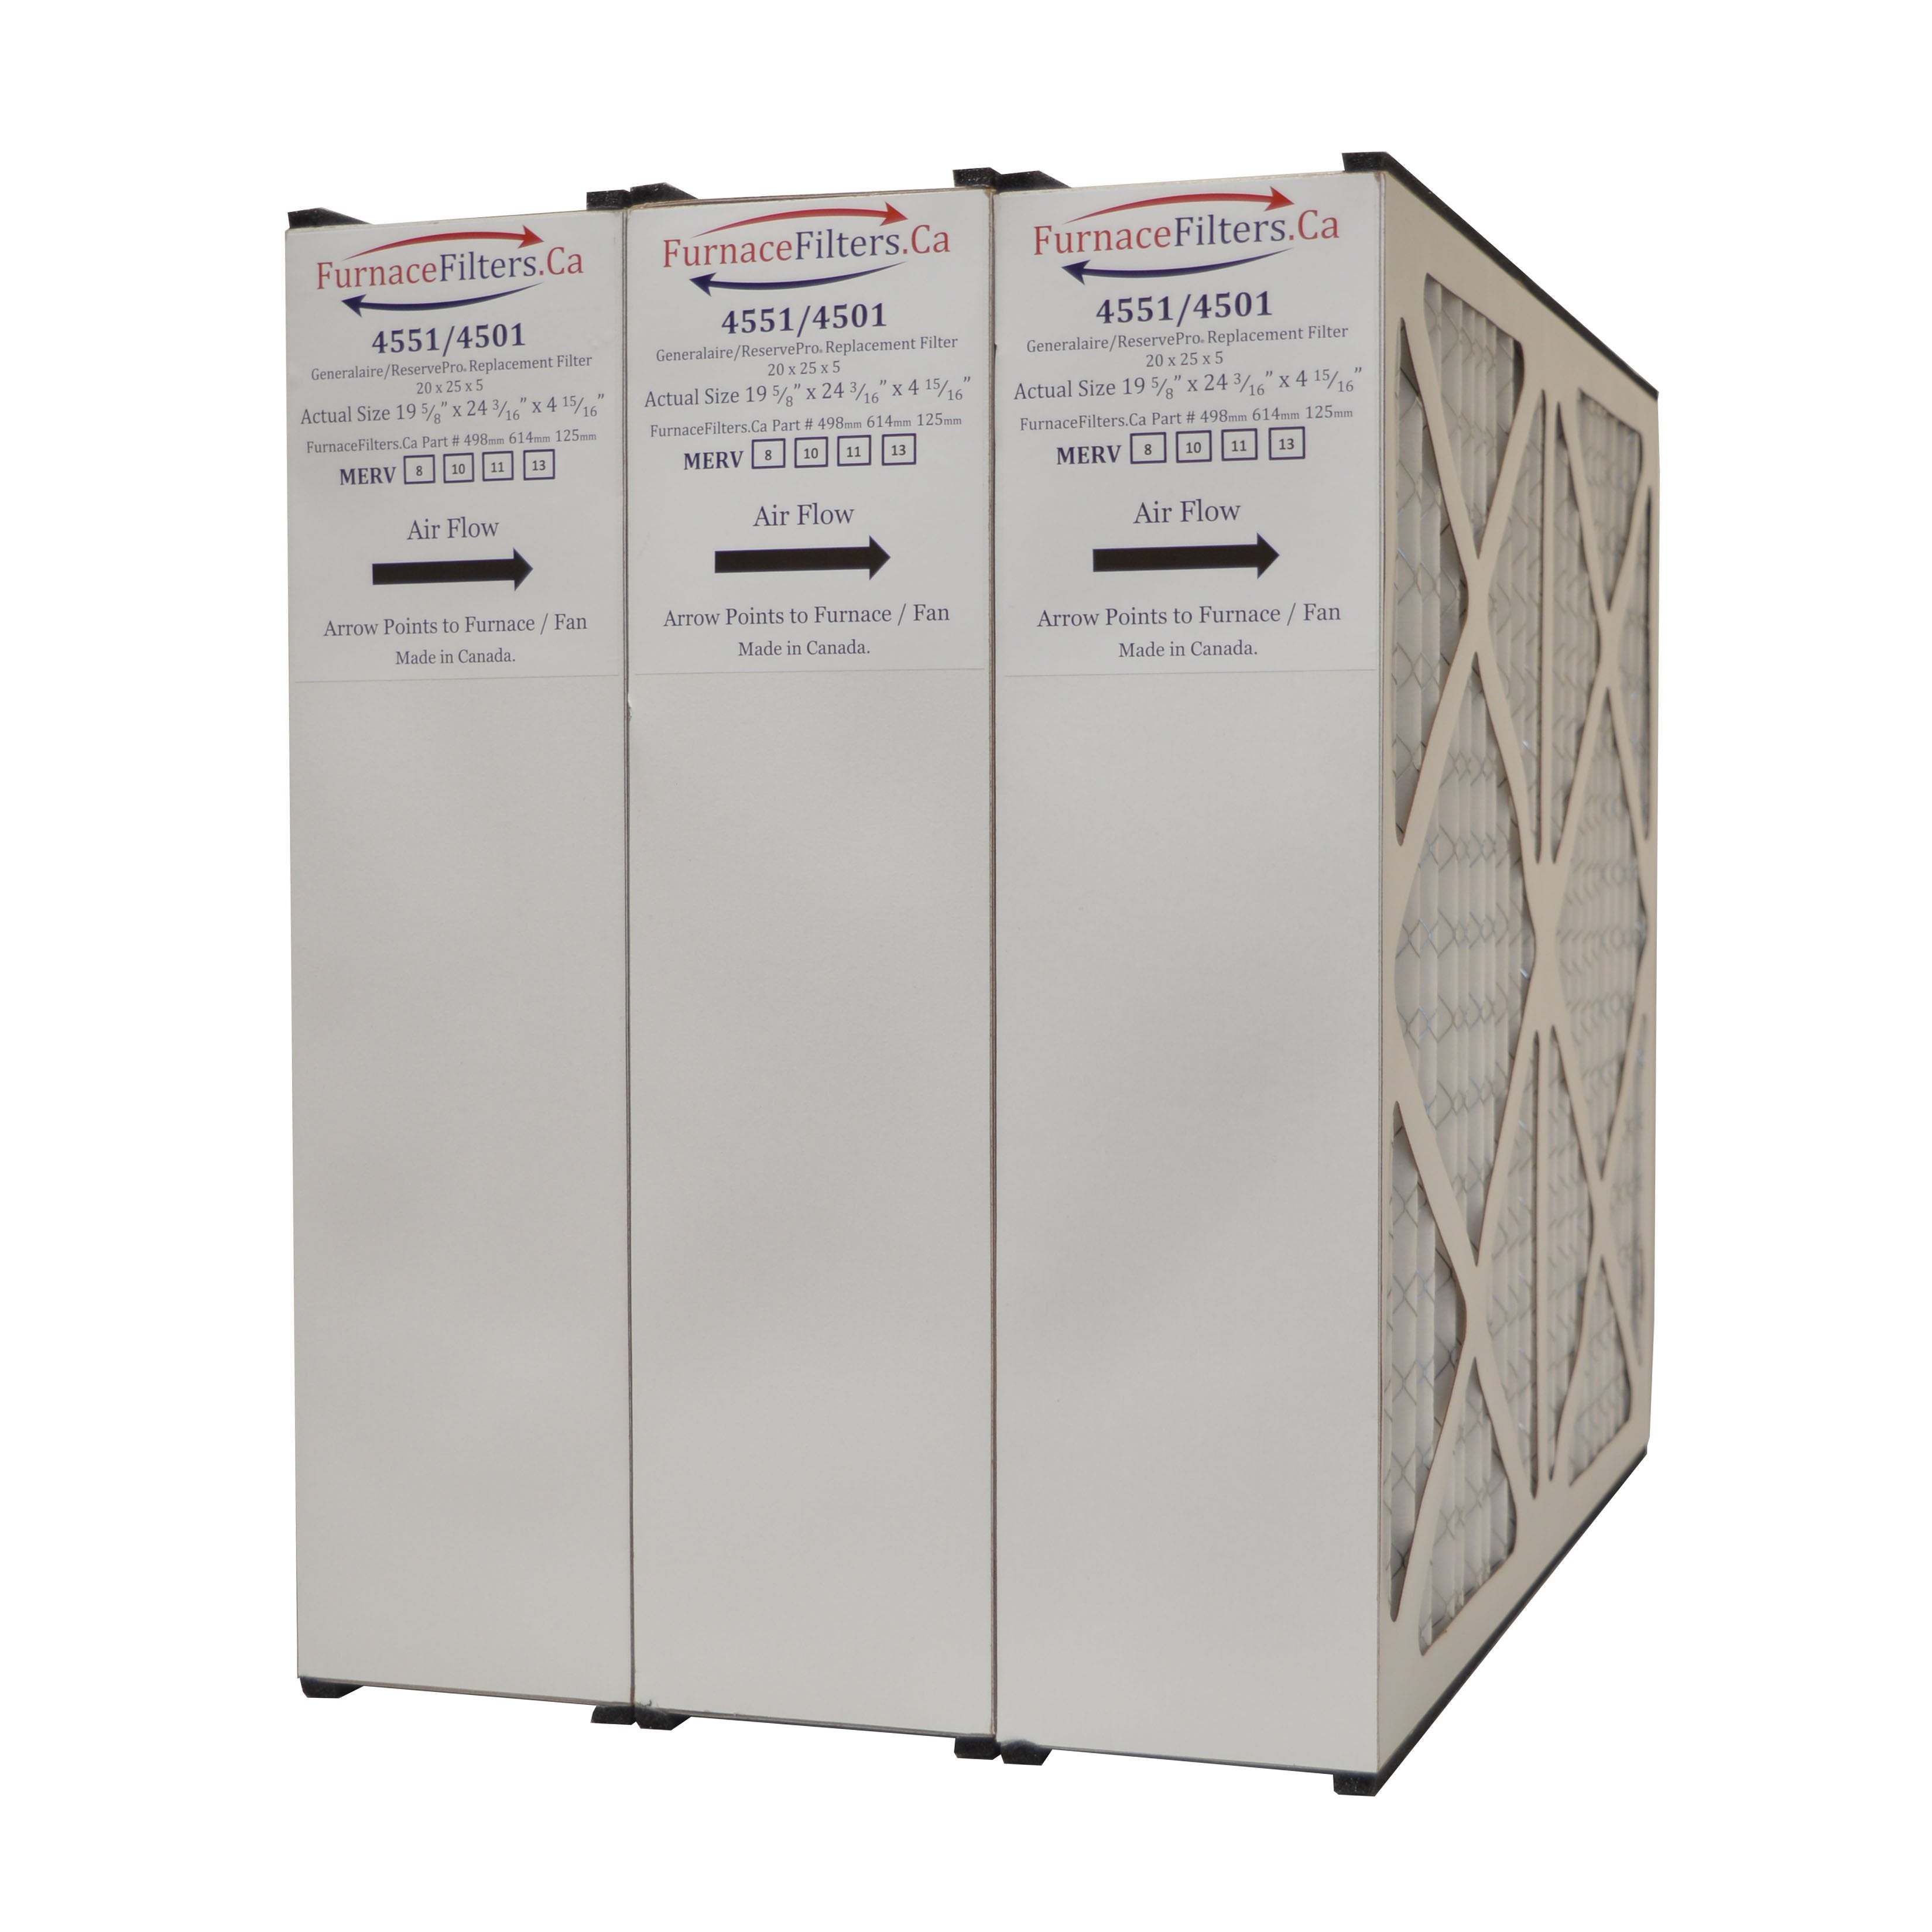 Generalaire 4501 Furnace Filter 20x25x5. Actual Size 19 5/8